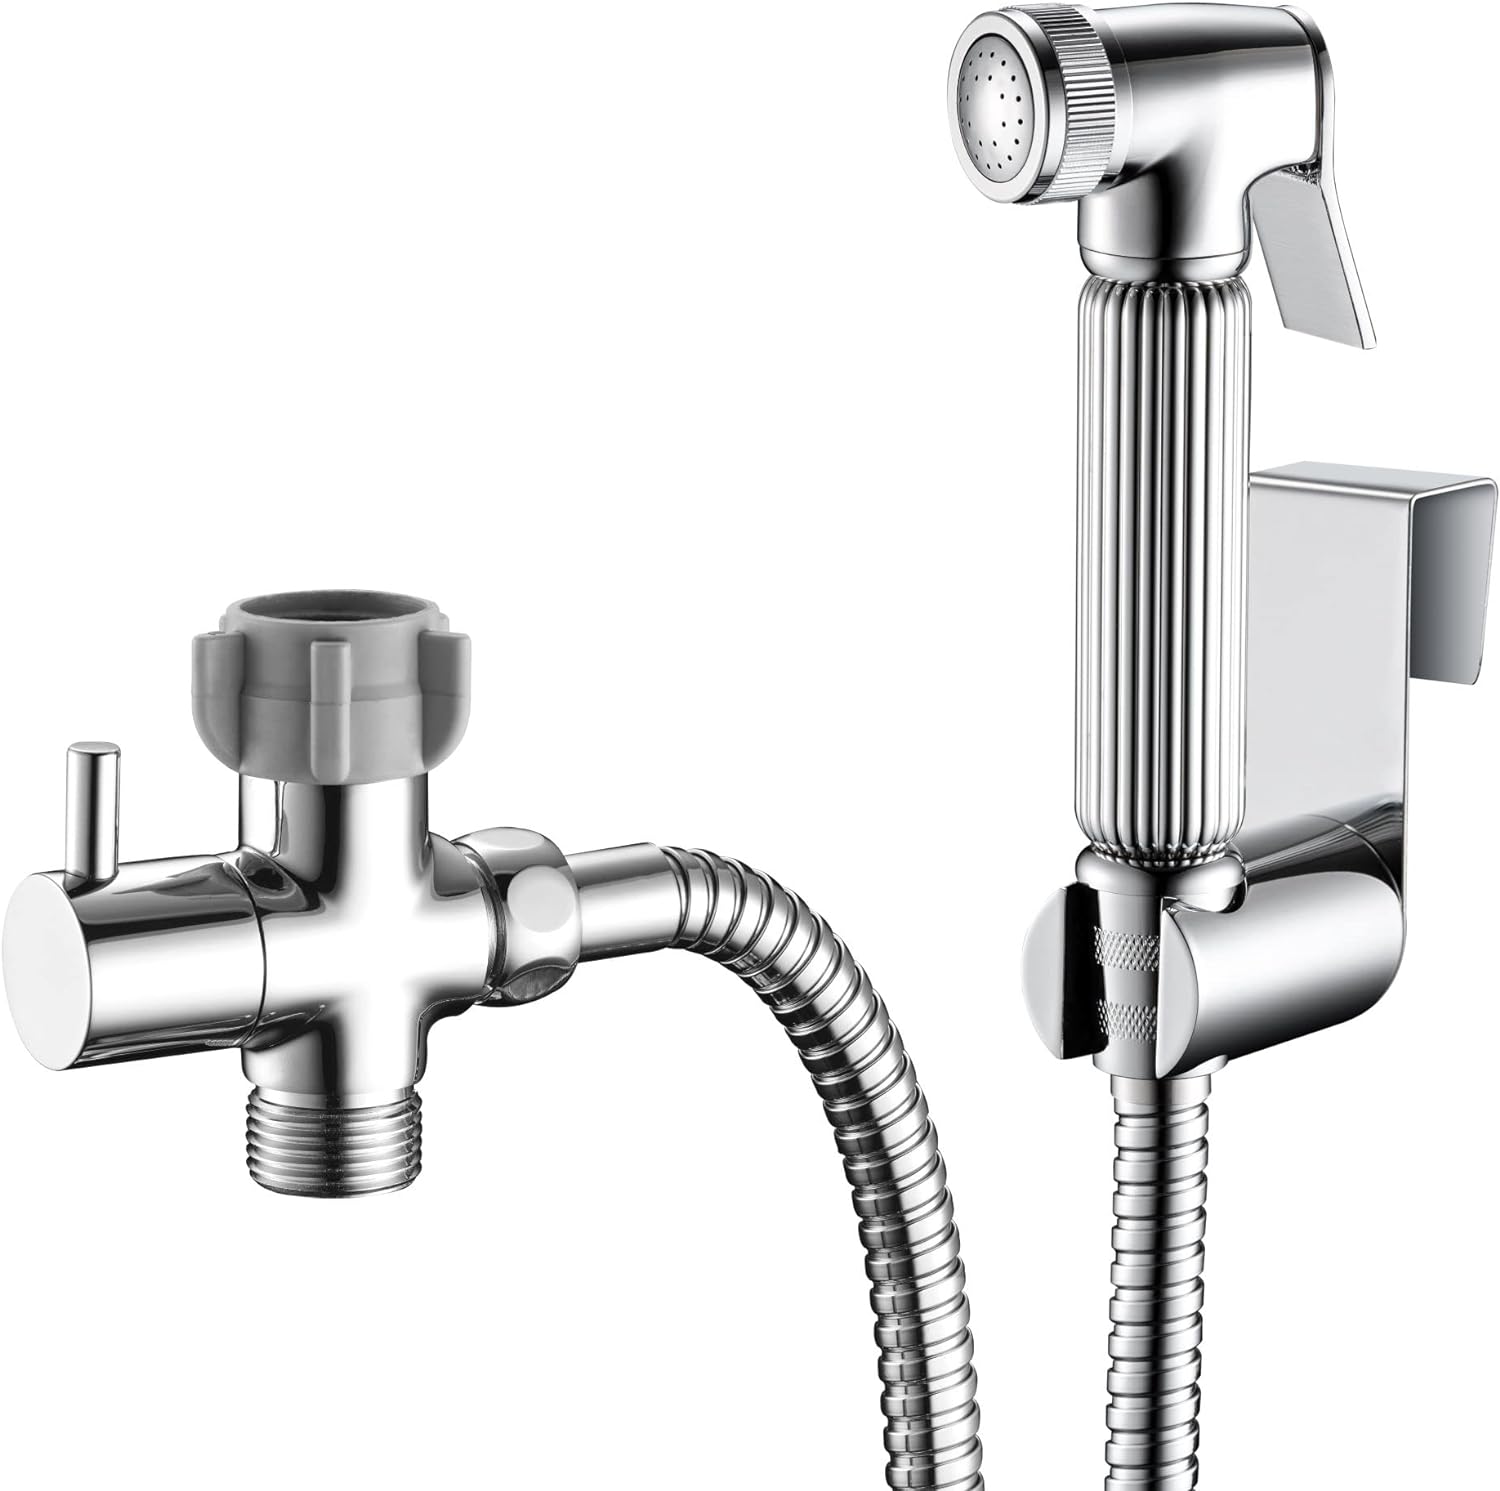 HammerHead Showers All Metal Handheld Bidet Sprayer for Toilet, Chrome | Universal T-Valve Adapter Attachment | Perfect Toilet Paper Substitute |